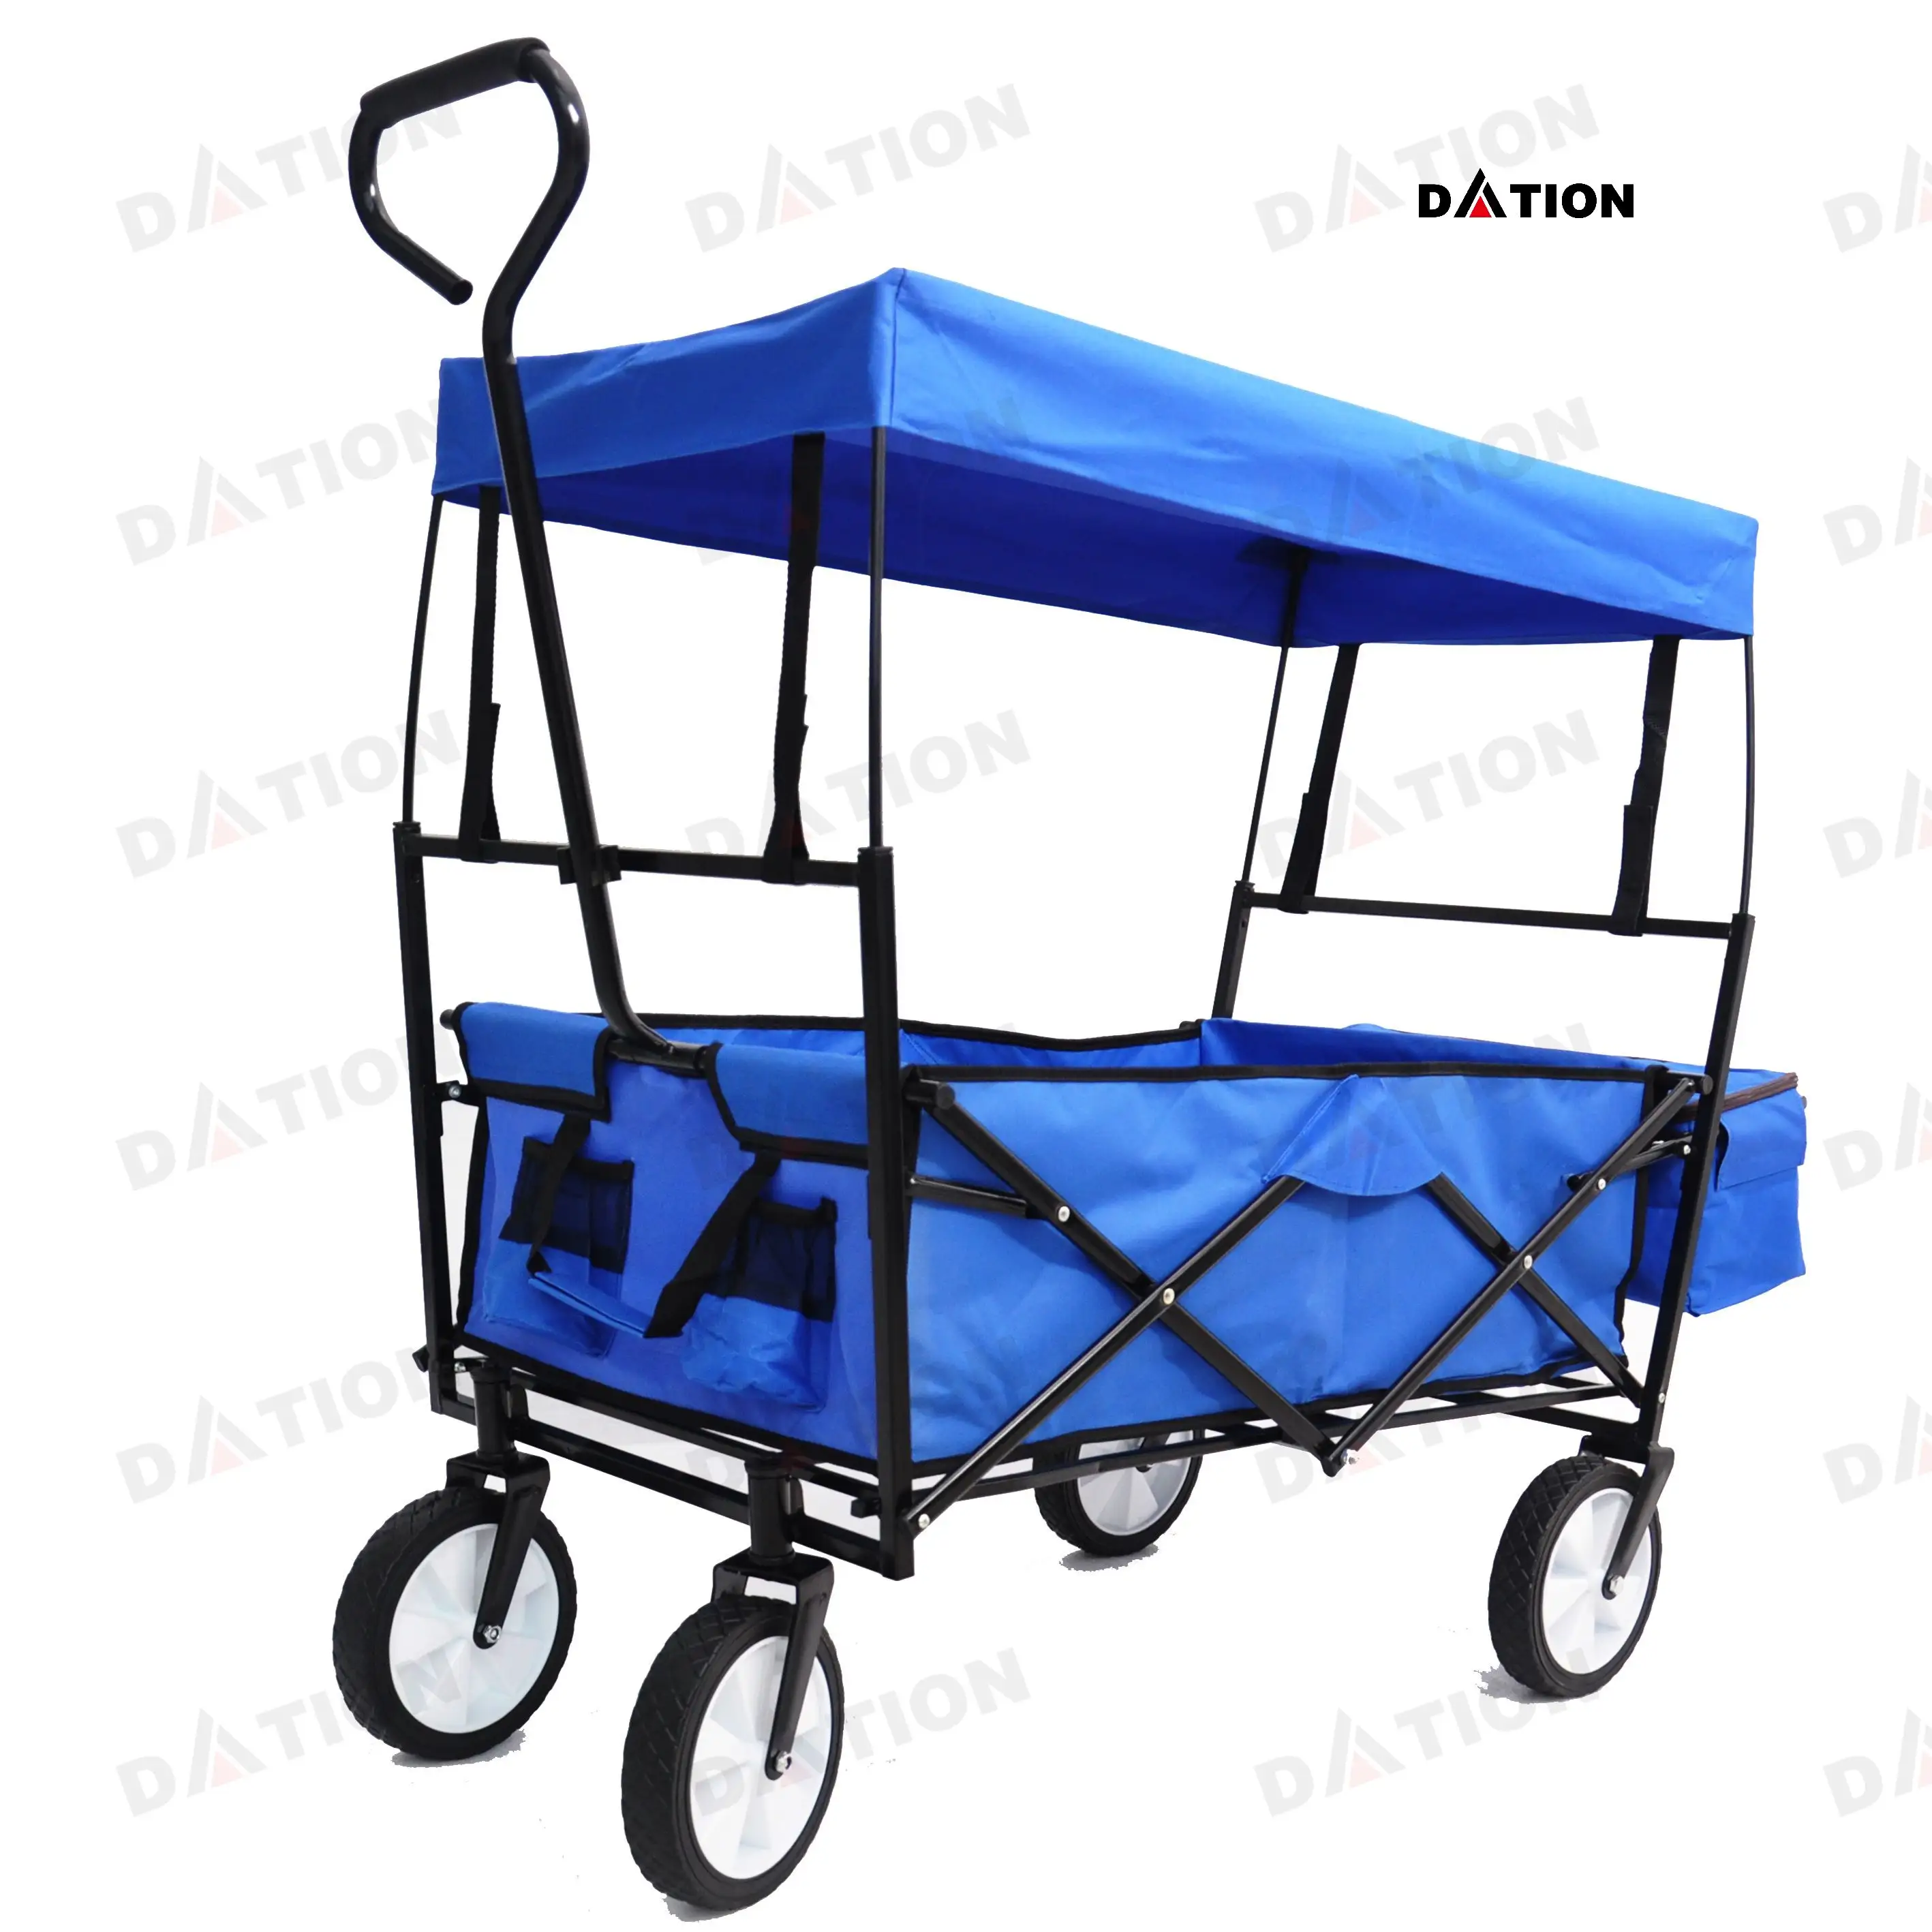 Outdoor Utility Wagon Detachable Pockets With Canopy Garden Cart for Beach Picnic Camping Trolley Removable Canopy